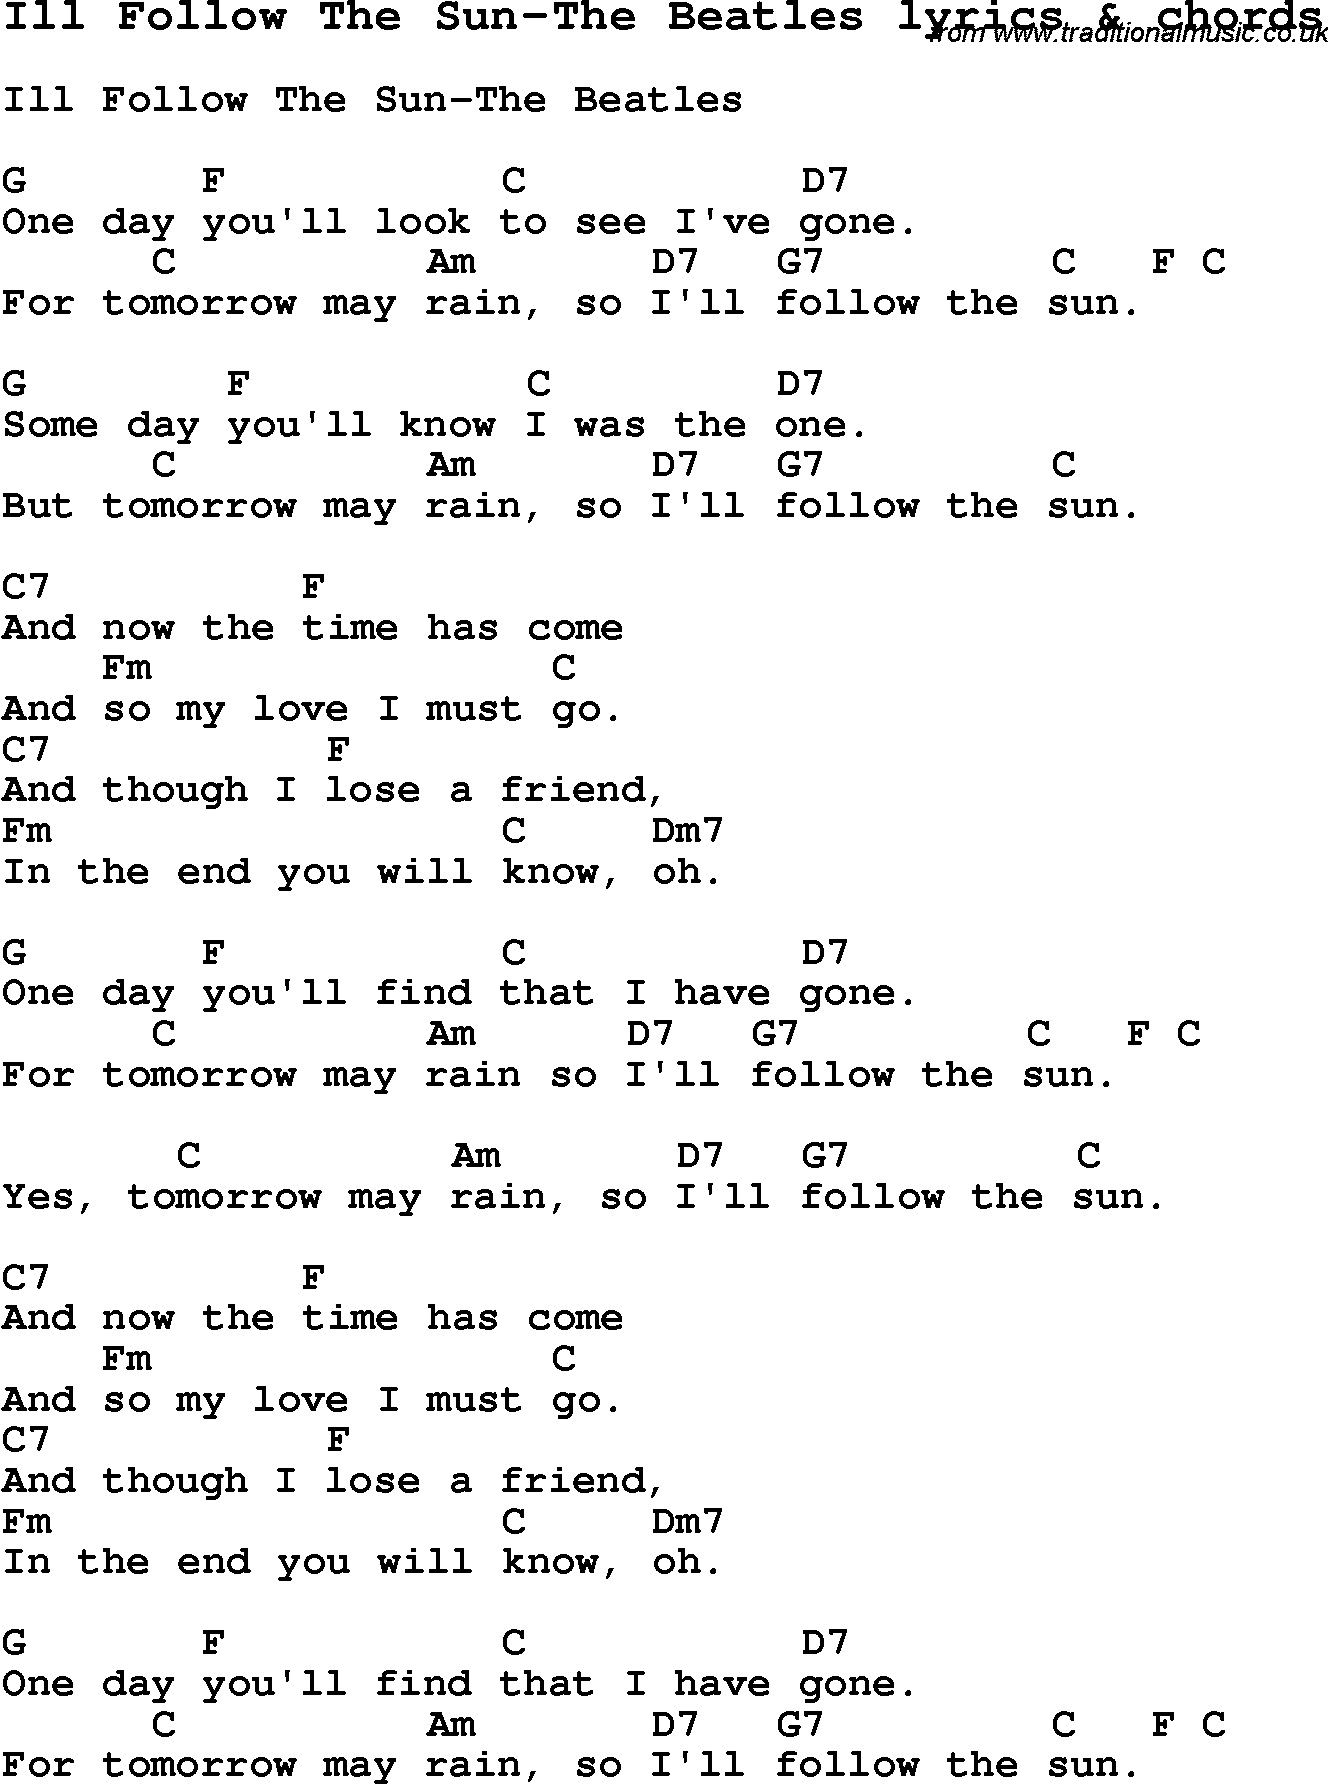 Love Song Lyrics for: Ill Follow The Sun-The Beatles with chords for Ukulele, Guitar Banjo etc.